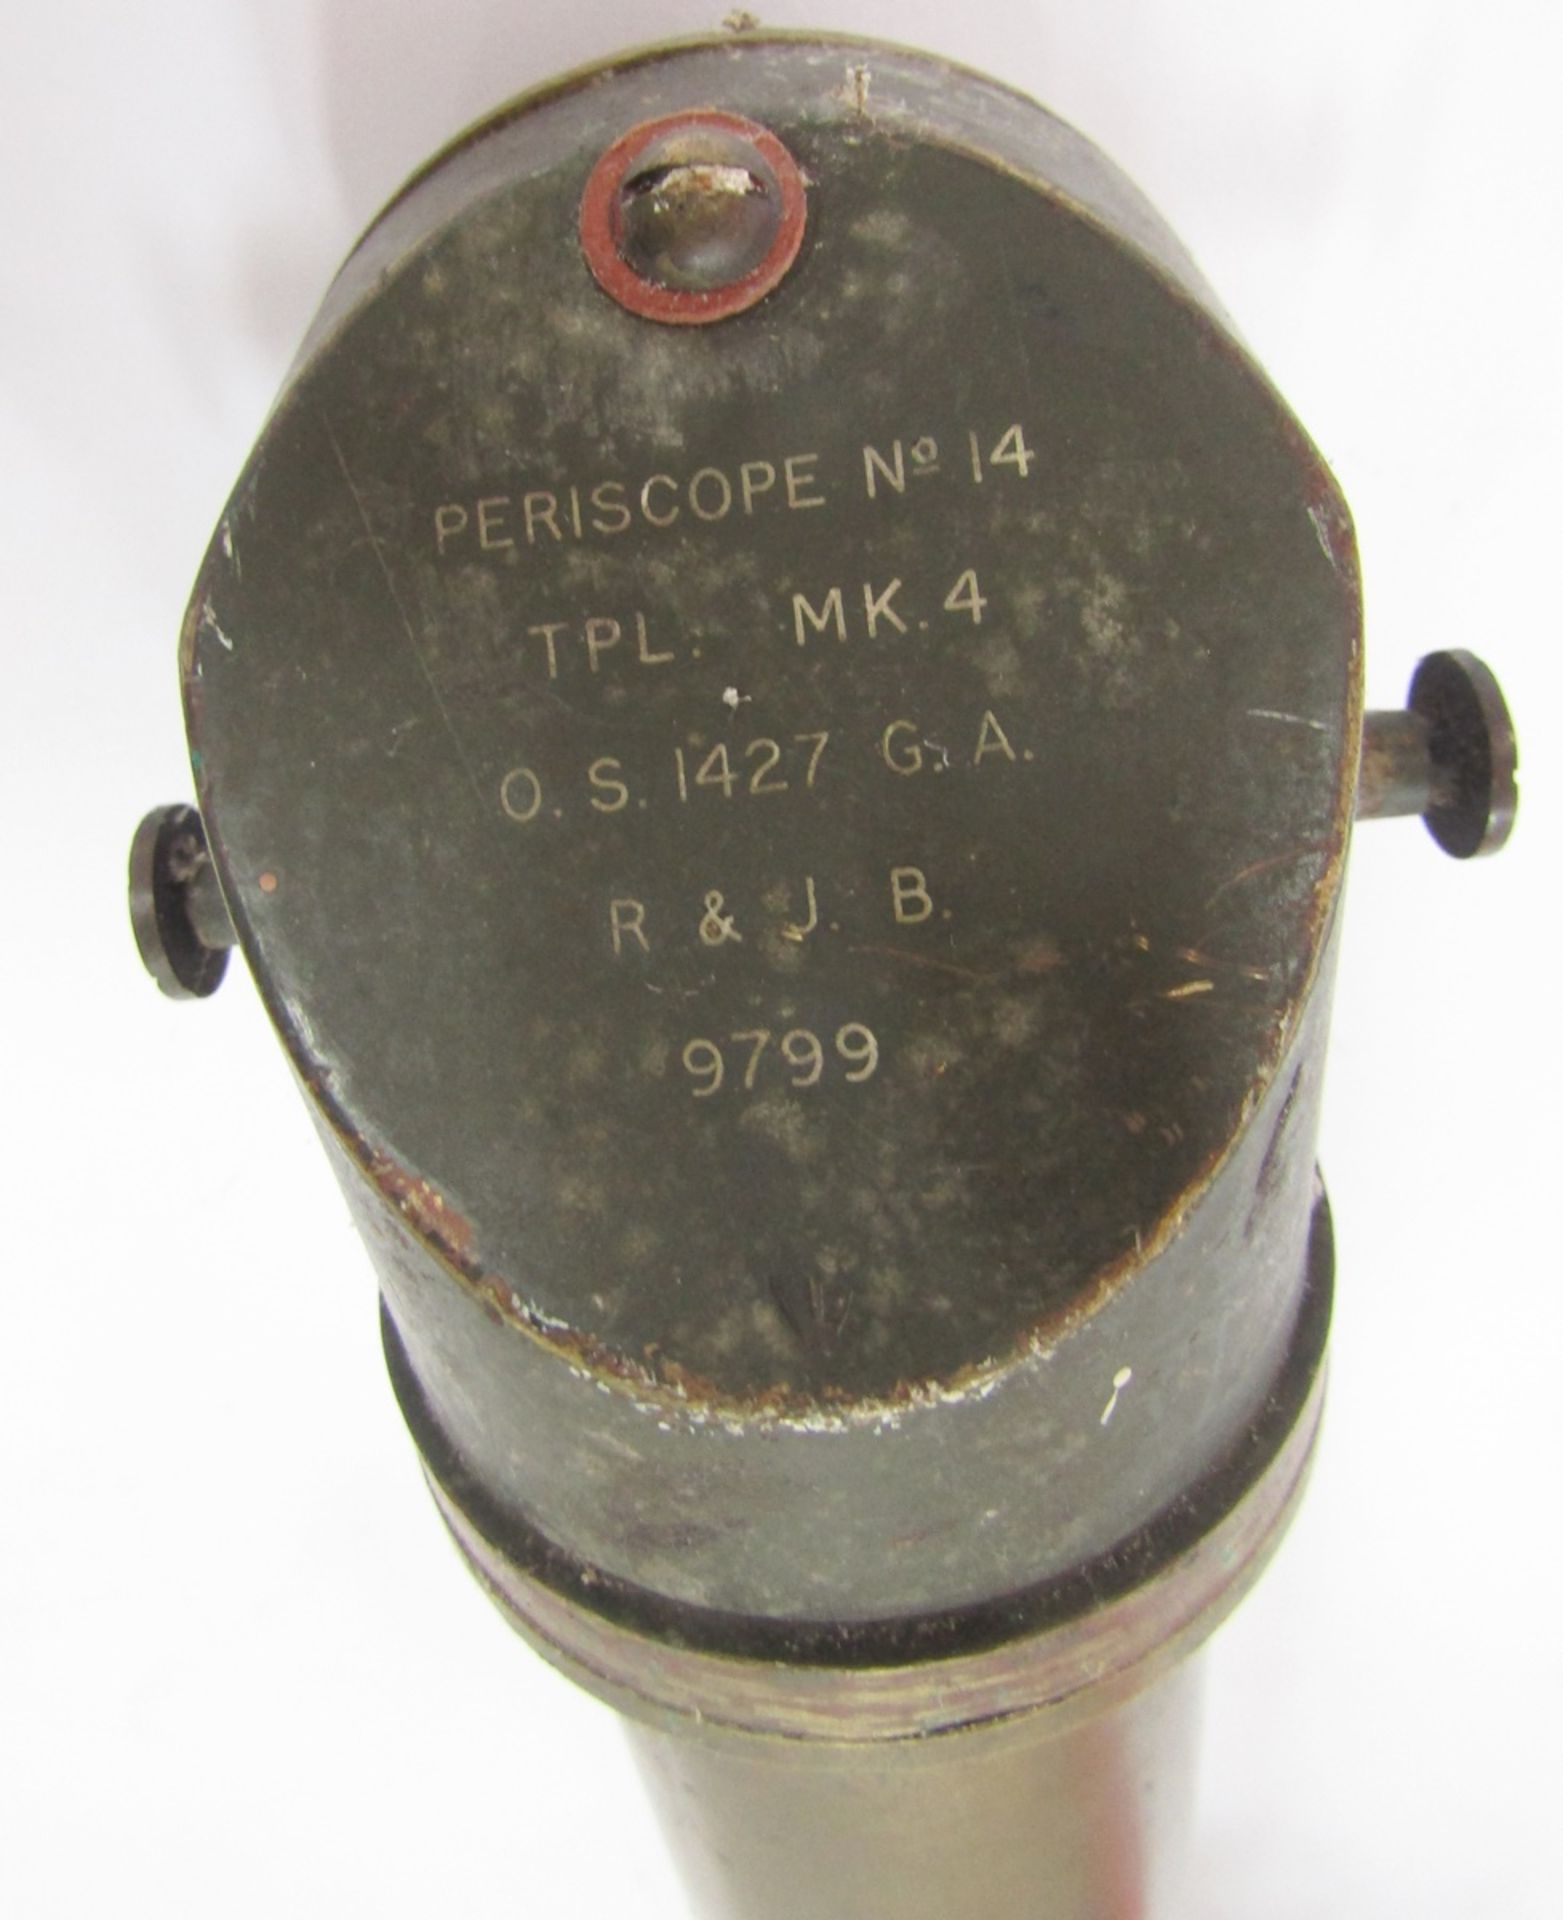 WWII trench periscope No 14, TPL mark 4, 051427, R and JB. - Image 3 of 6